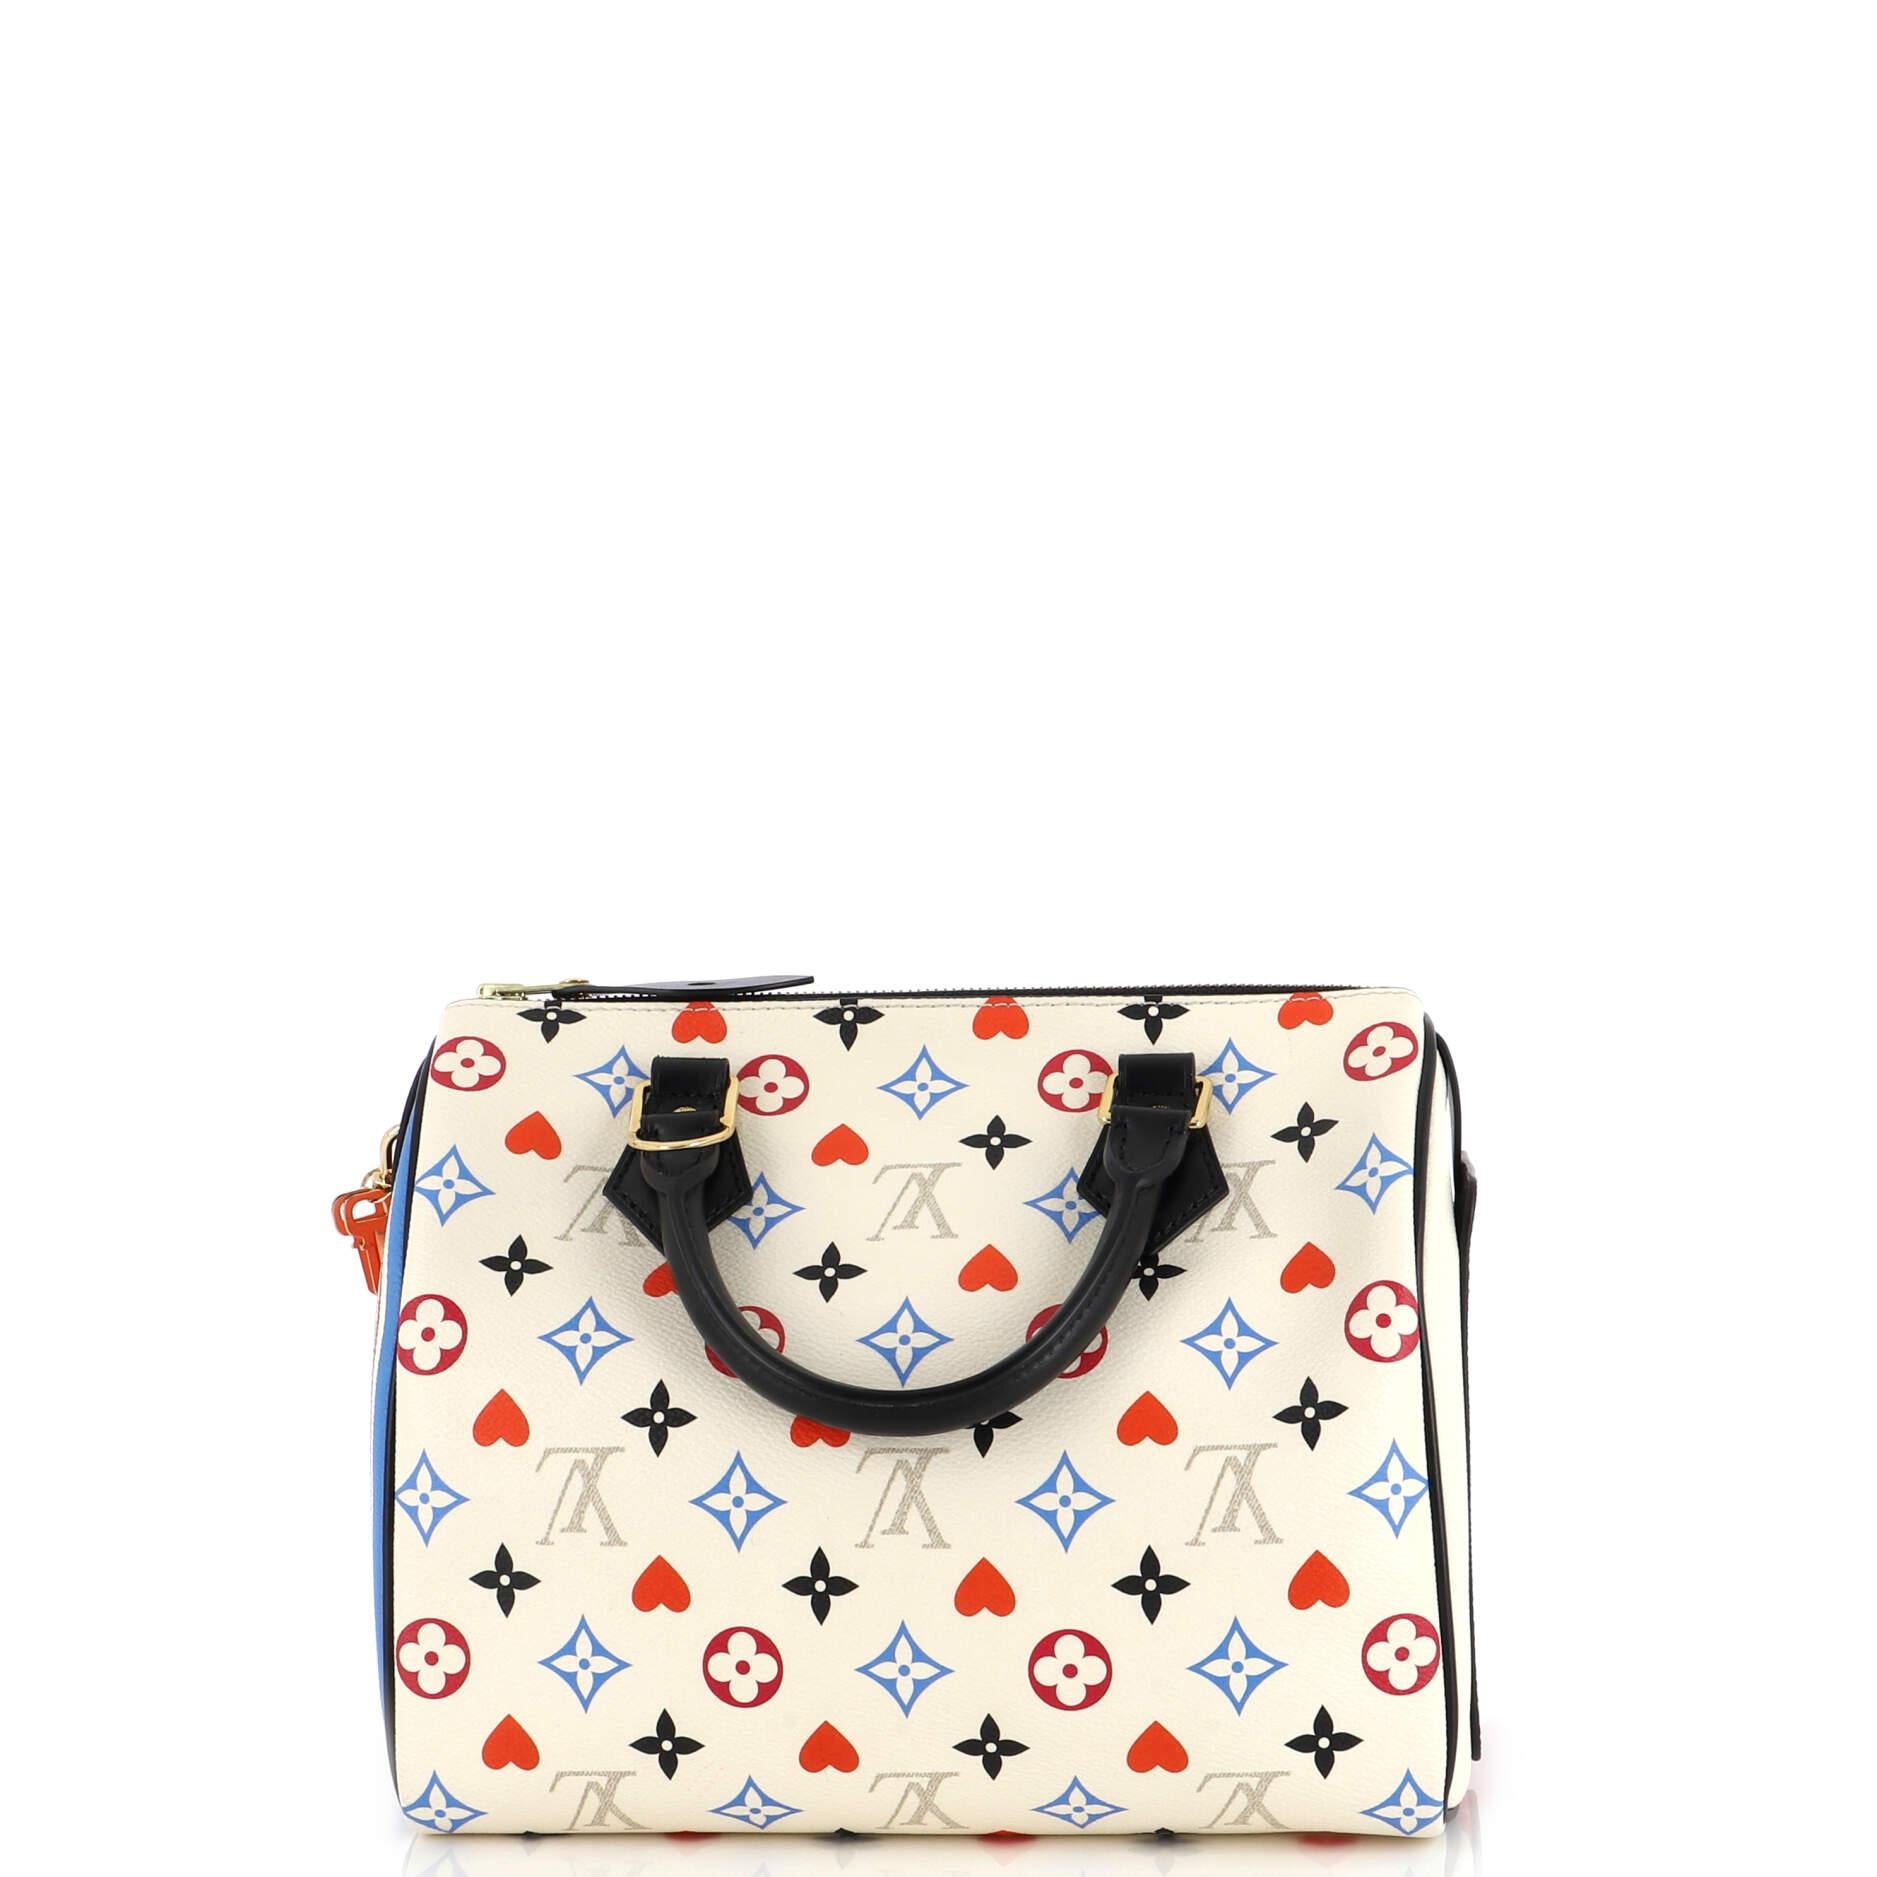 Women's or Men's Louis Vuitton Speedy Bandouliere Bag Limited Edition Game On Multicolor Monogram For Sale